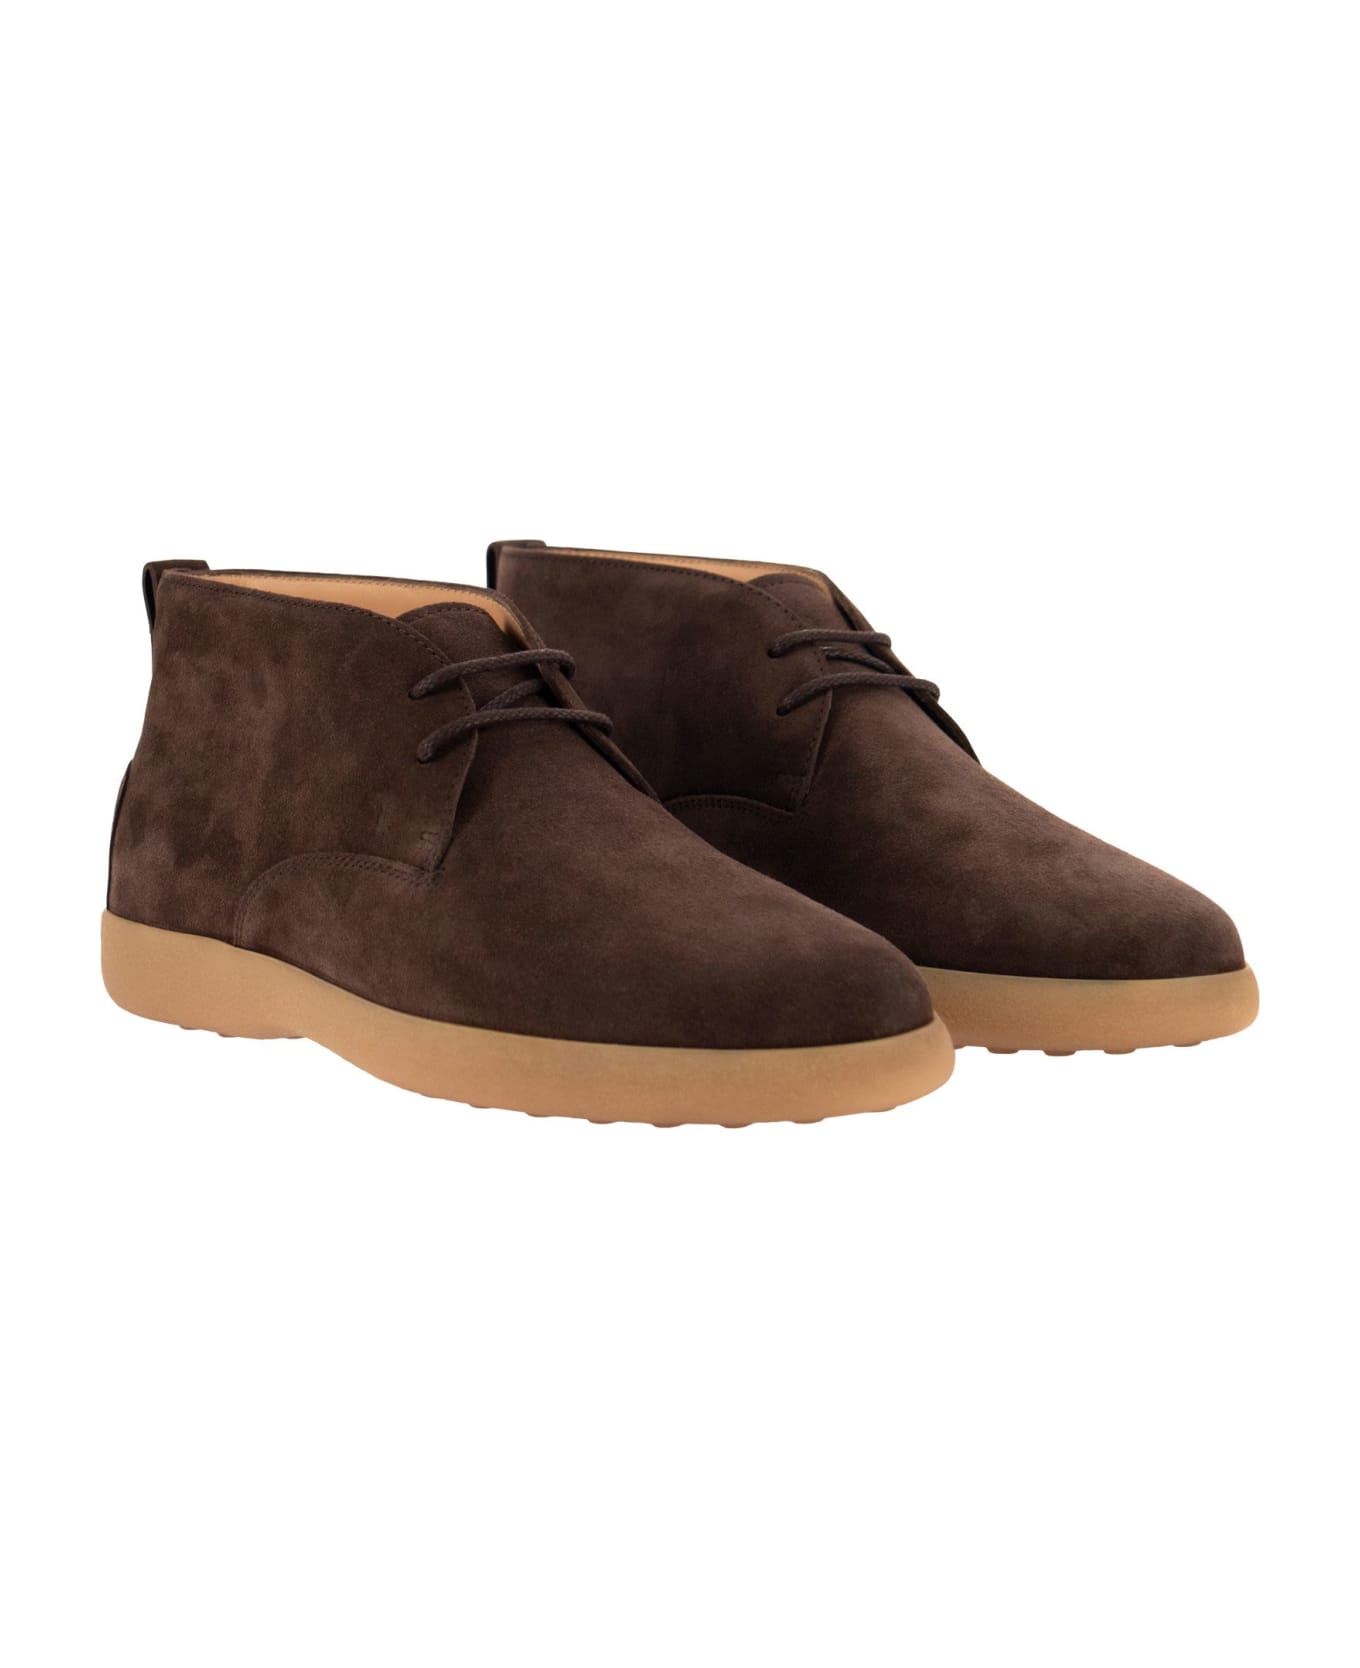 Tod's Suede Leather Boots - Brown ブーツ